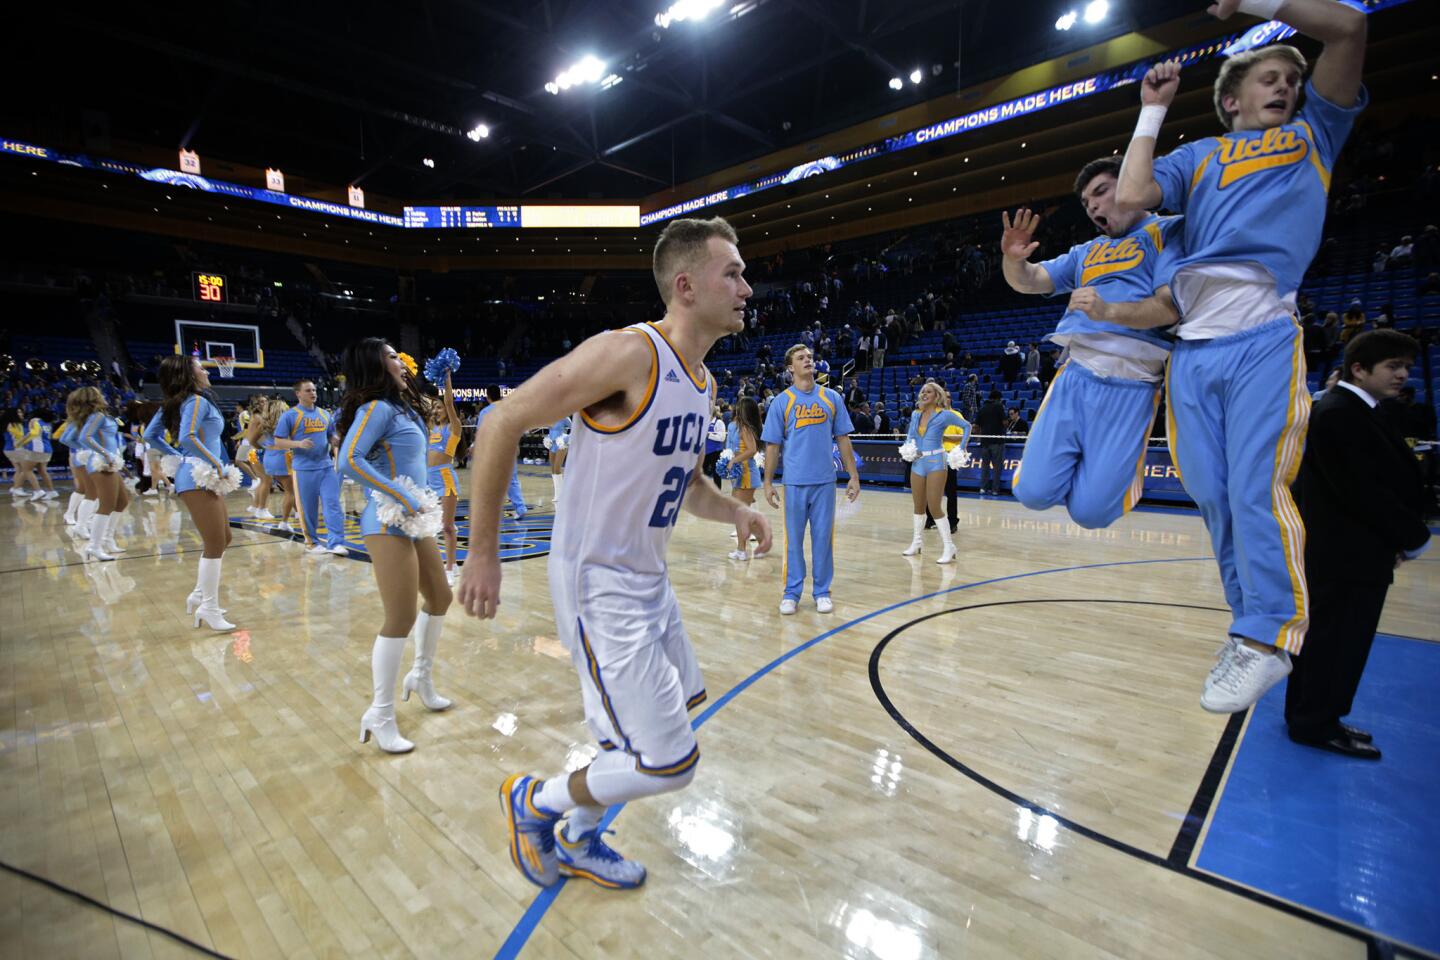 UCLA cheerleaders celebrate as guard Bryce Alford trots off the court after leading the Bruins to an 87-84 win over Arizona at Pauley Pavilion.